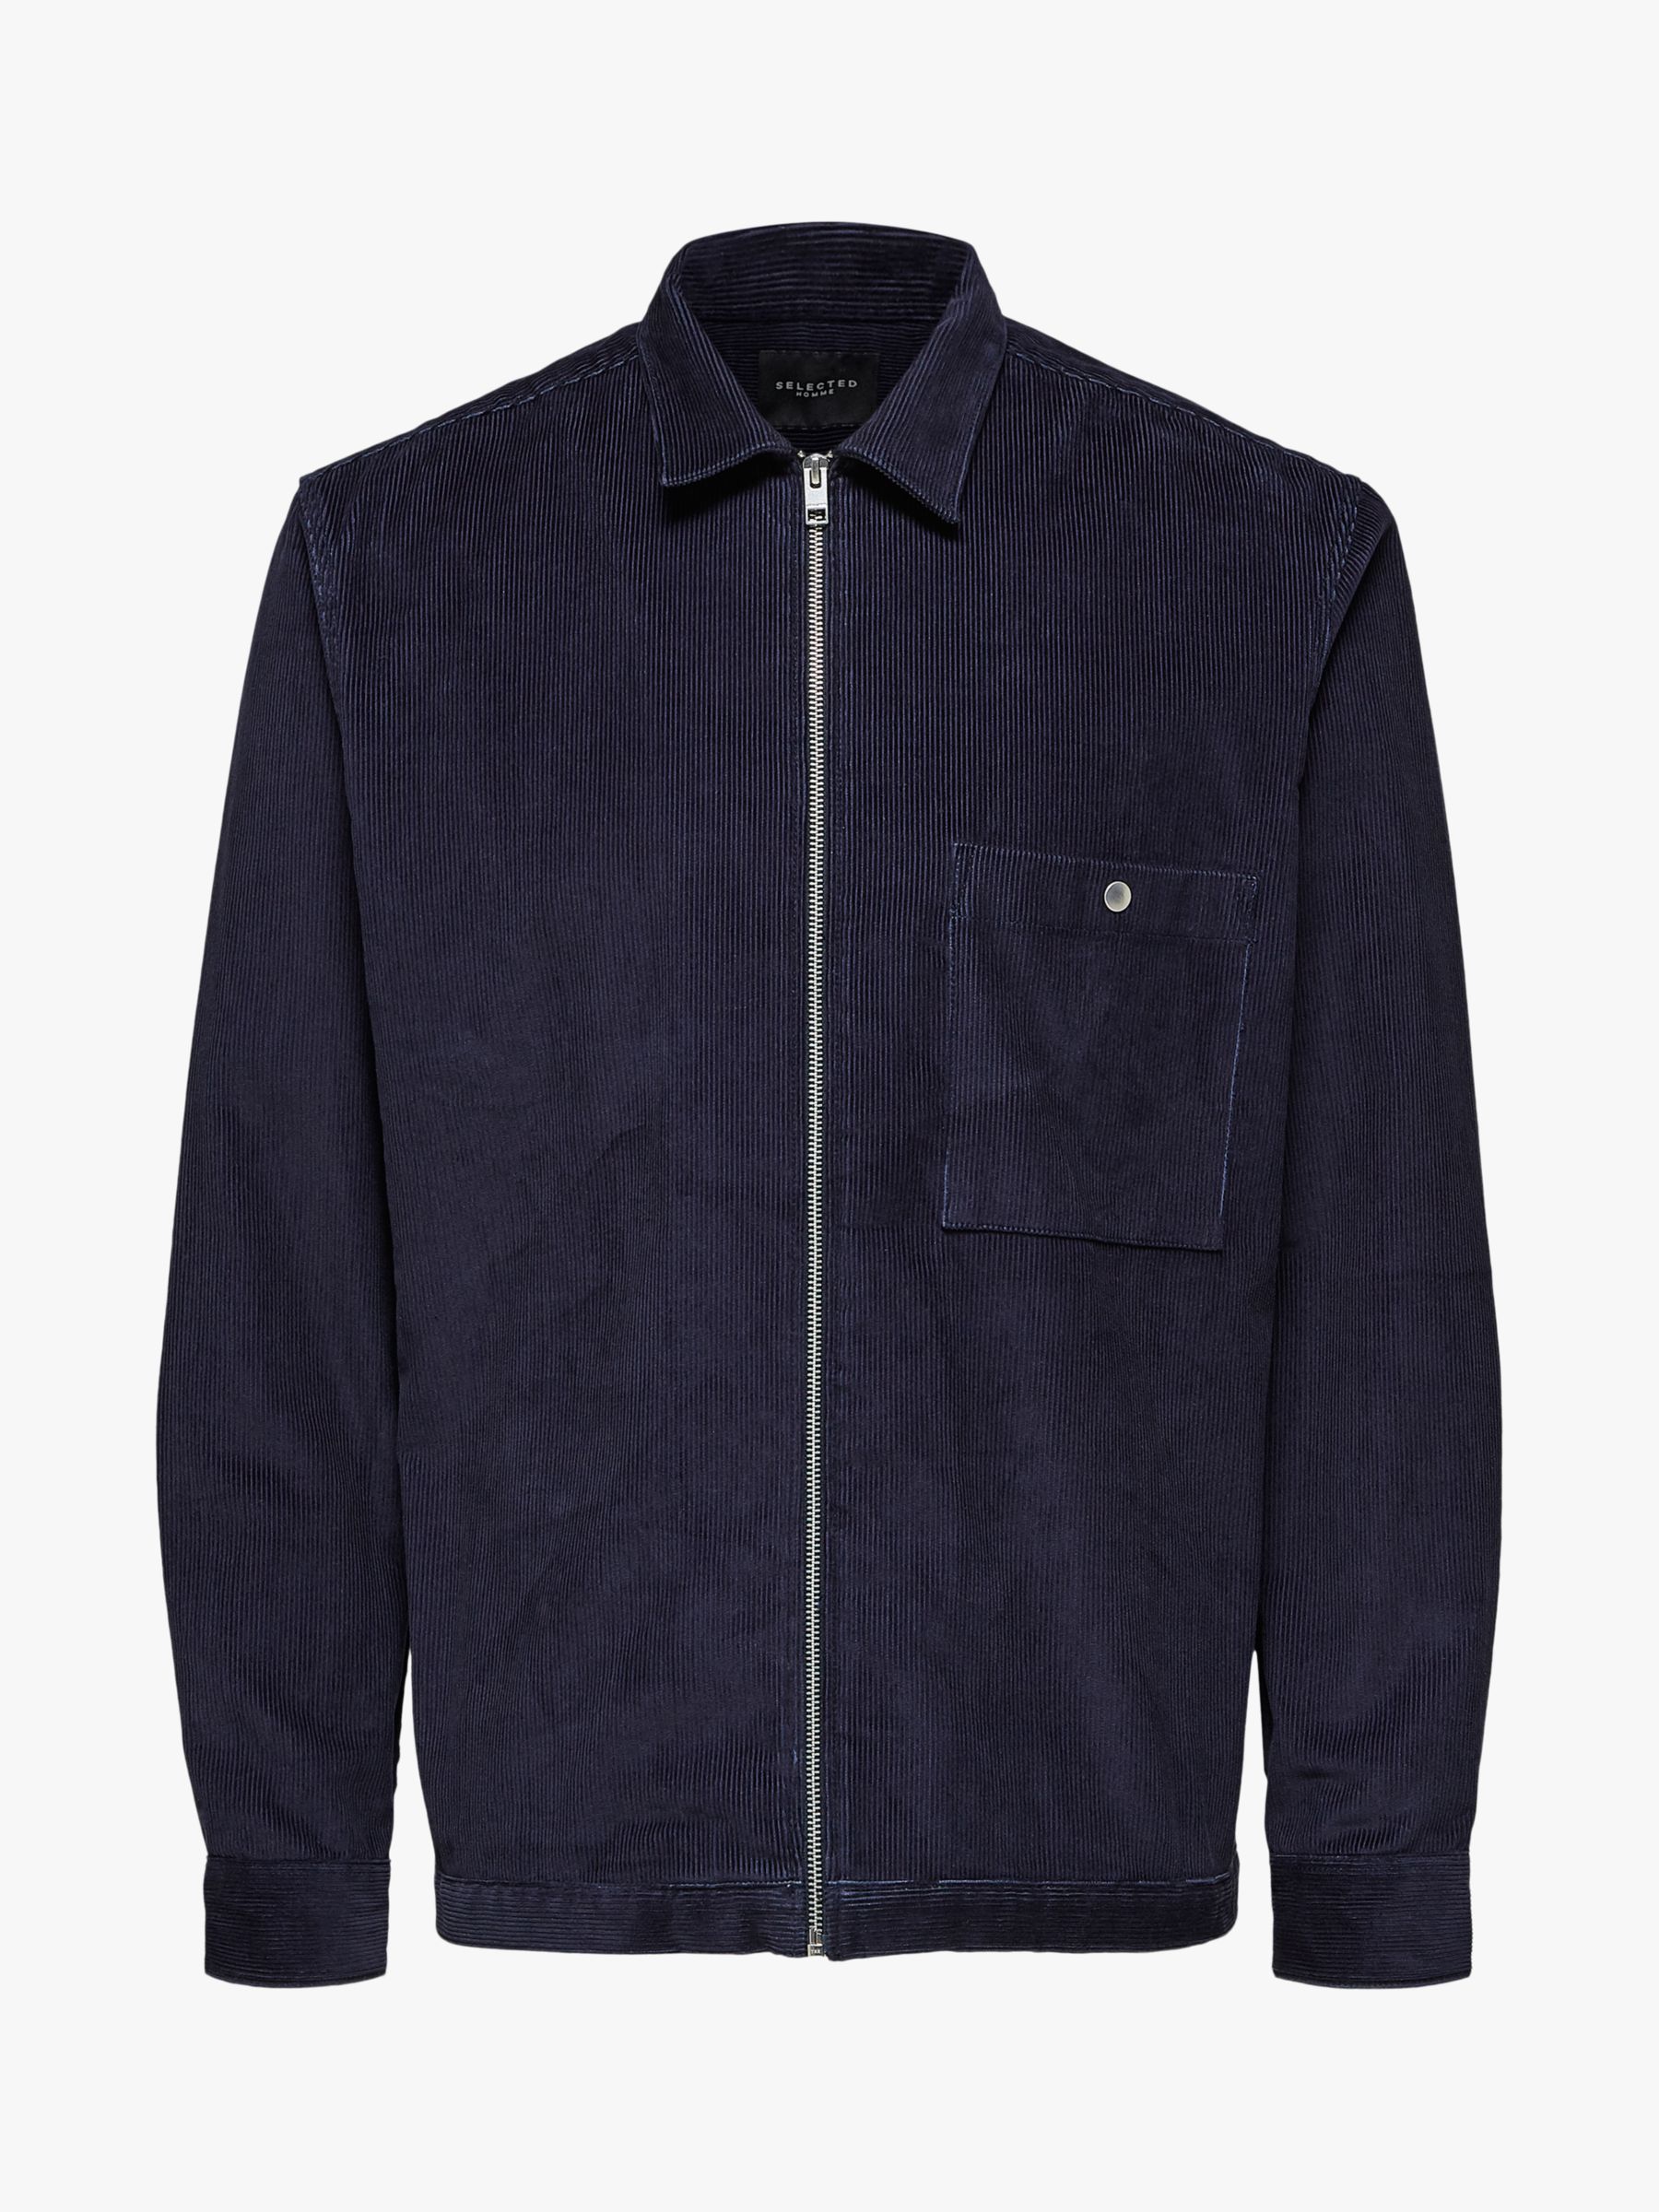 SELECTED HOMME Corduroy Overshirt, Sky Captain